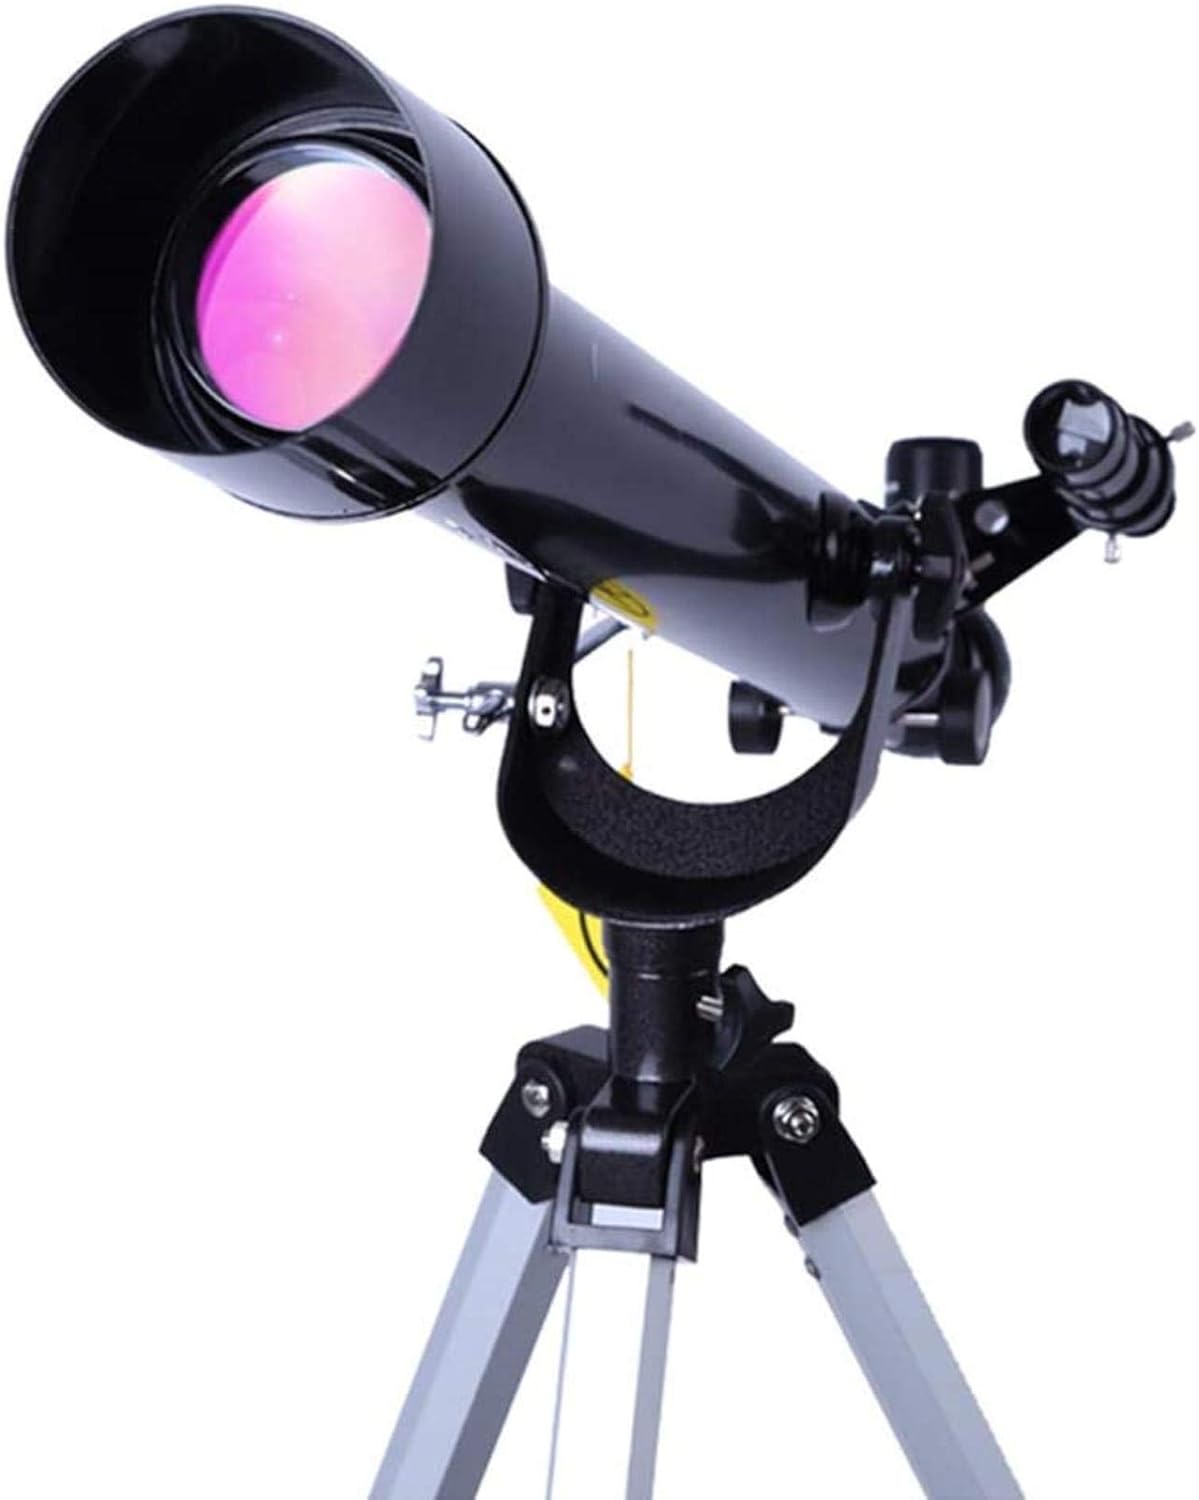 Spacmirrors Telescope for Astrophotography